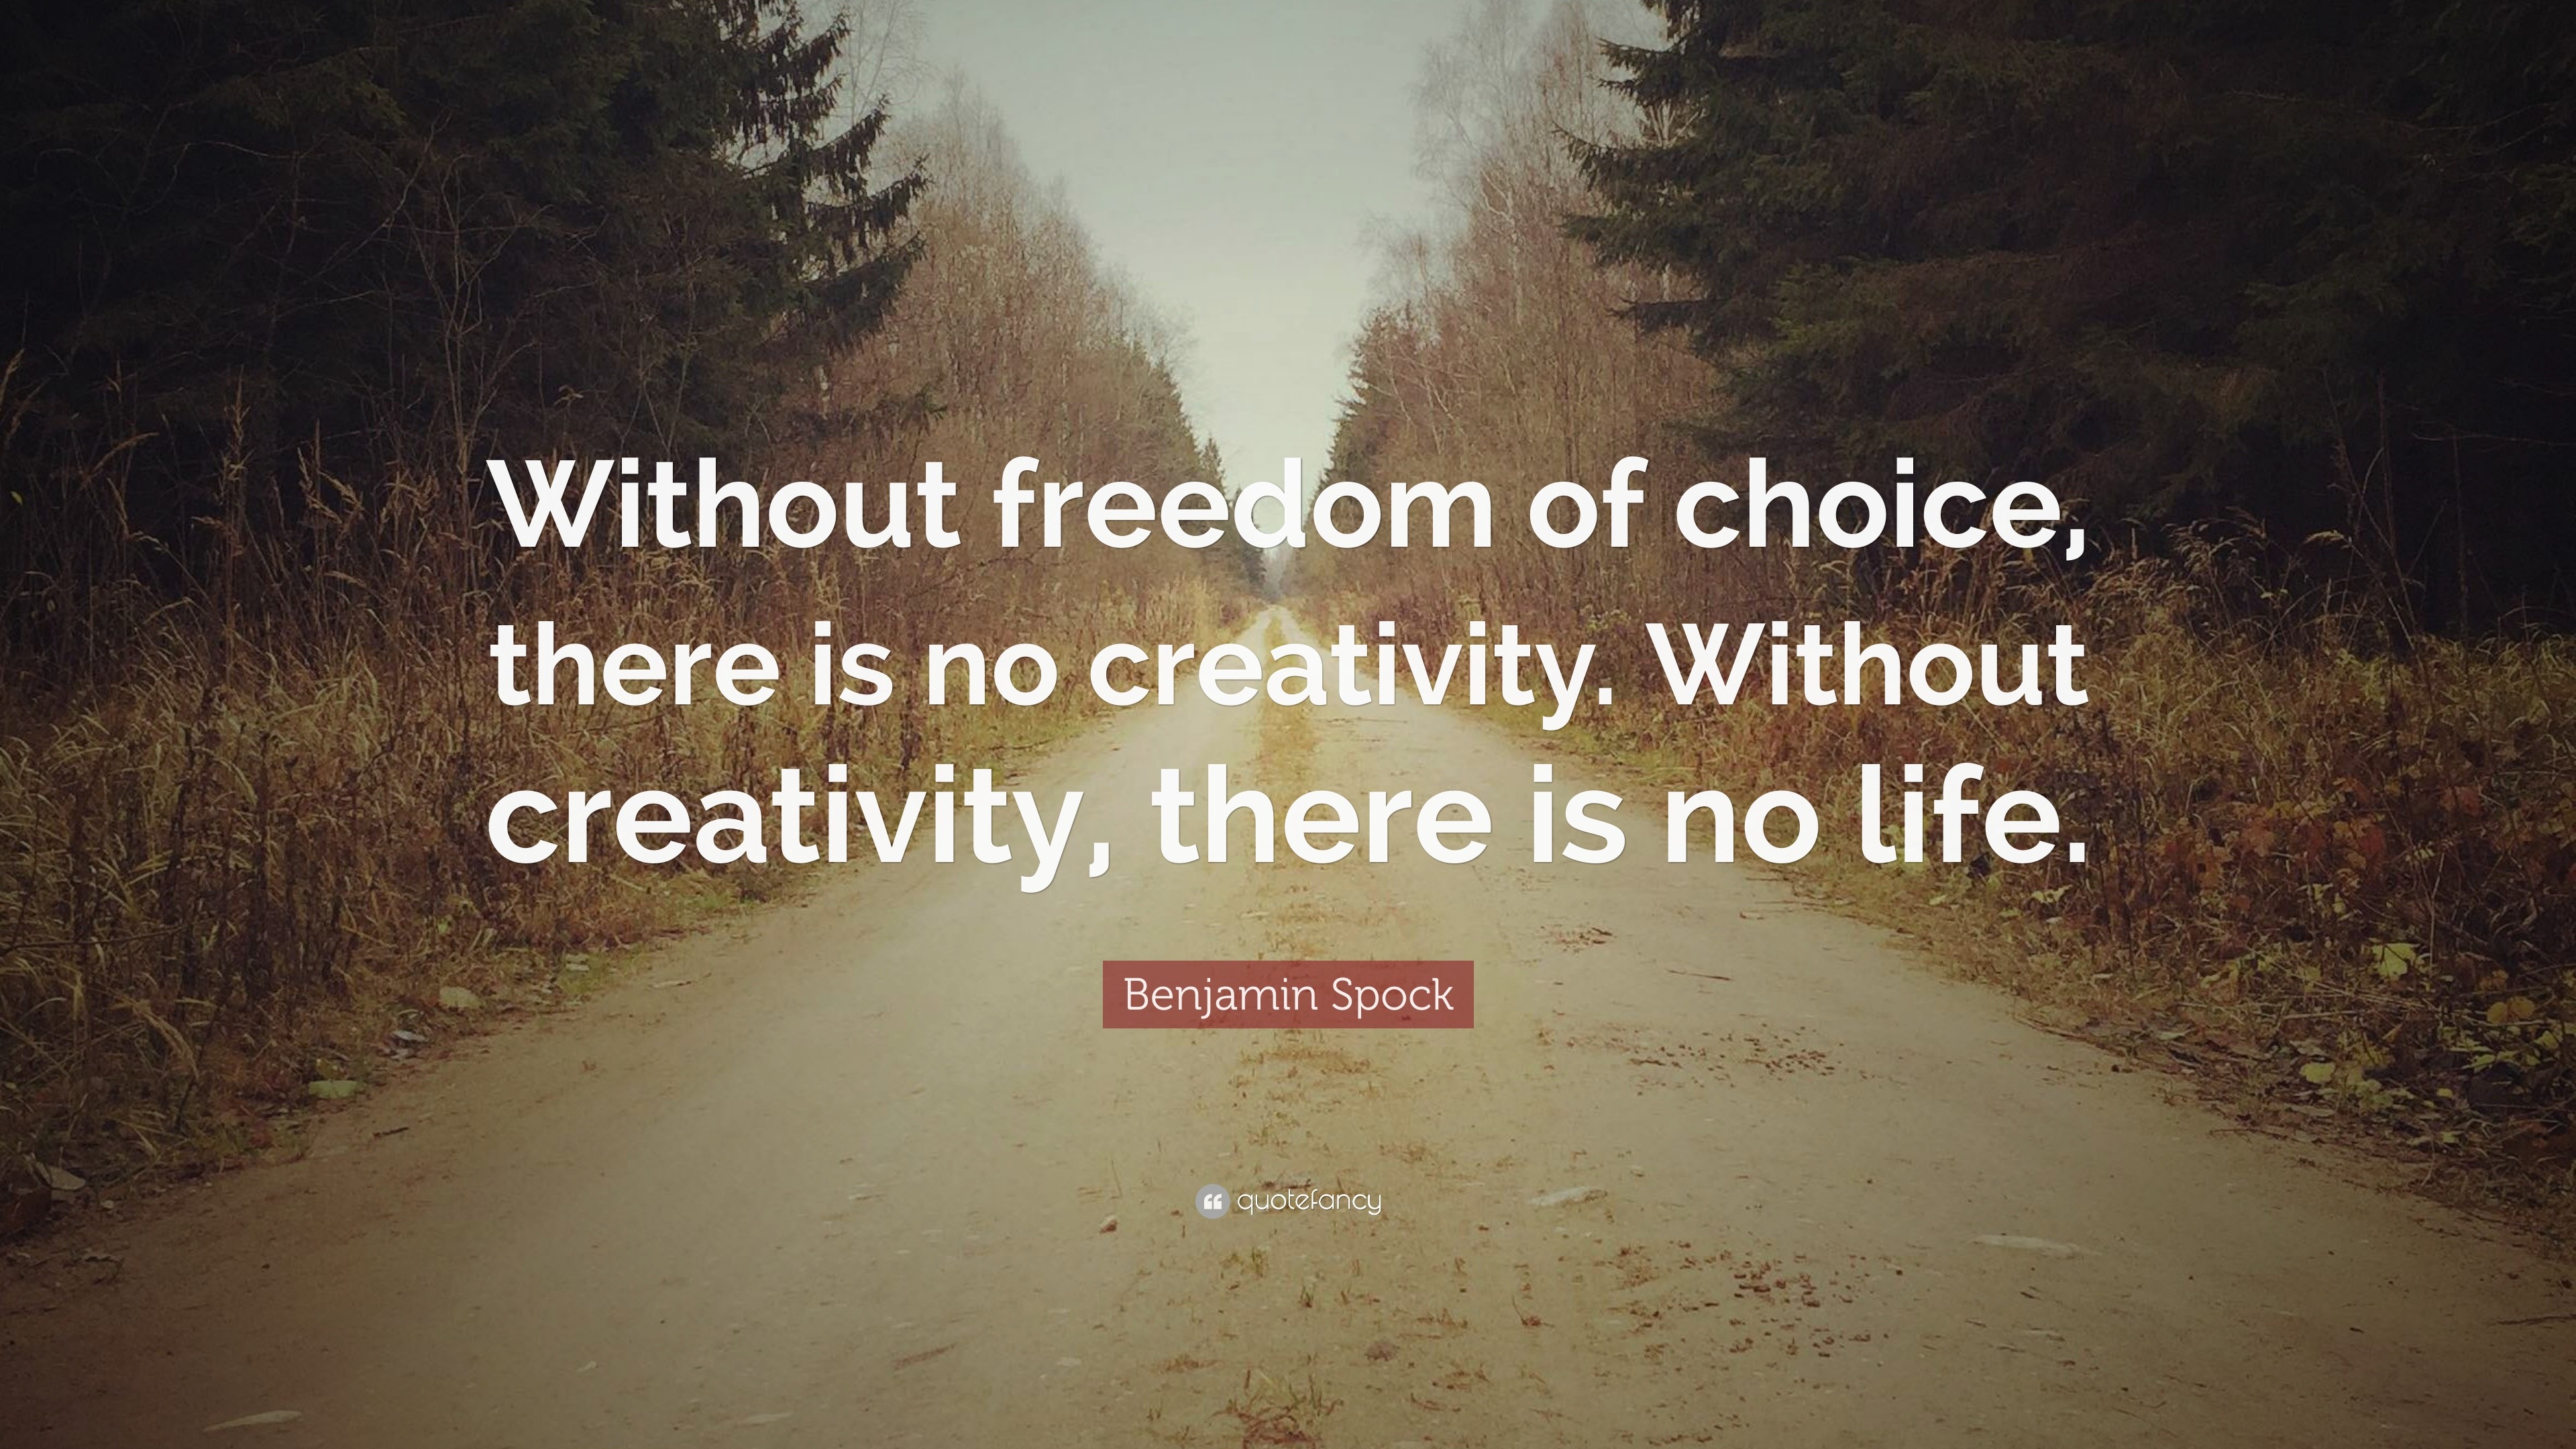 Benjamin Spock Quote: “Without freedom of choice, there is no